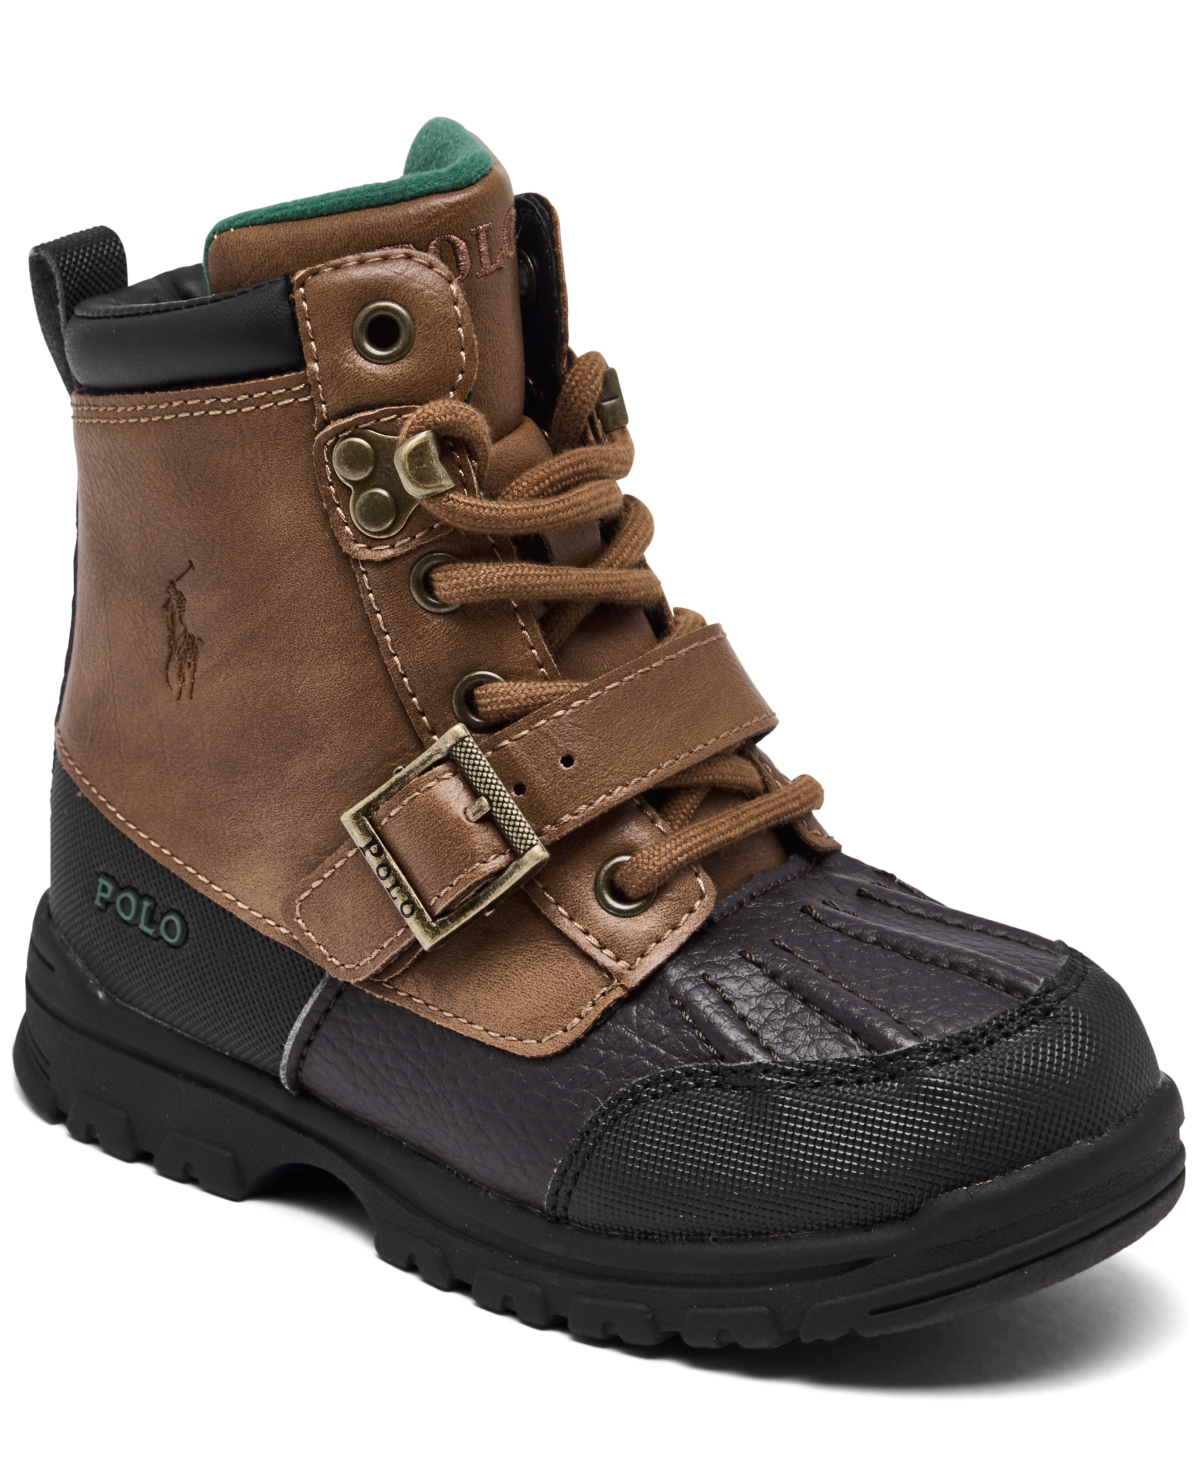 Polo Ralph Lauren Babies' Toddler Boys Colbey Mid Ii Boots From Finish Line In Tan,chocolate